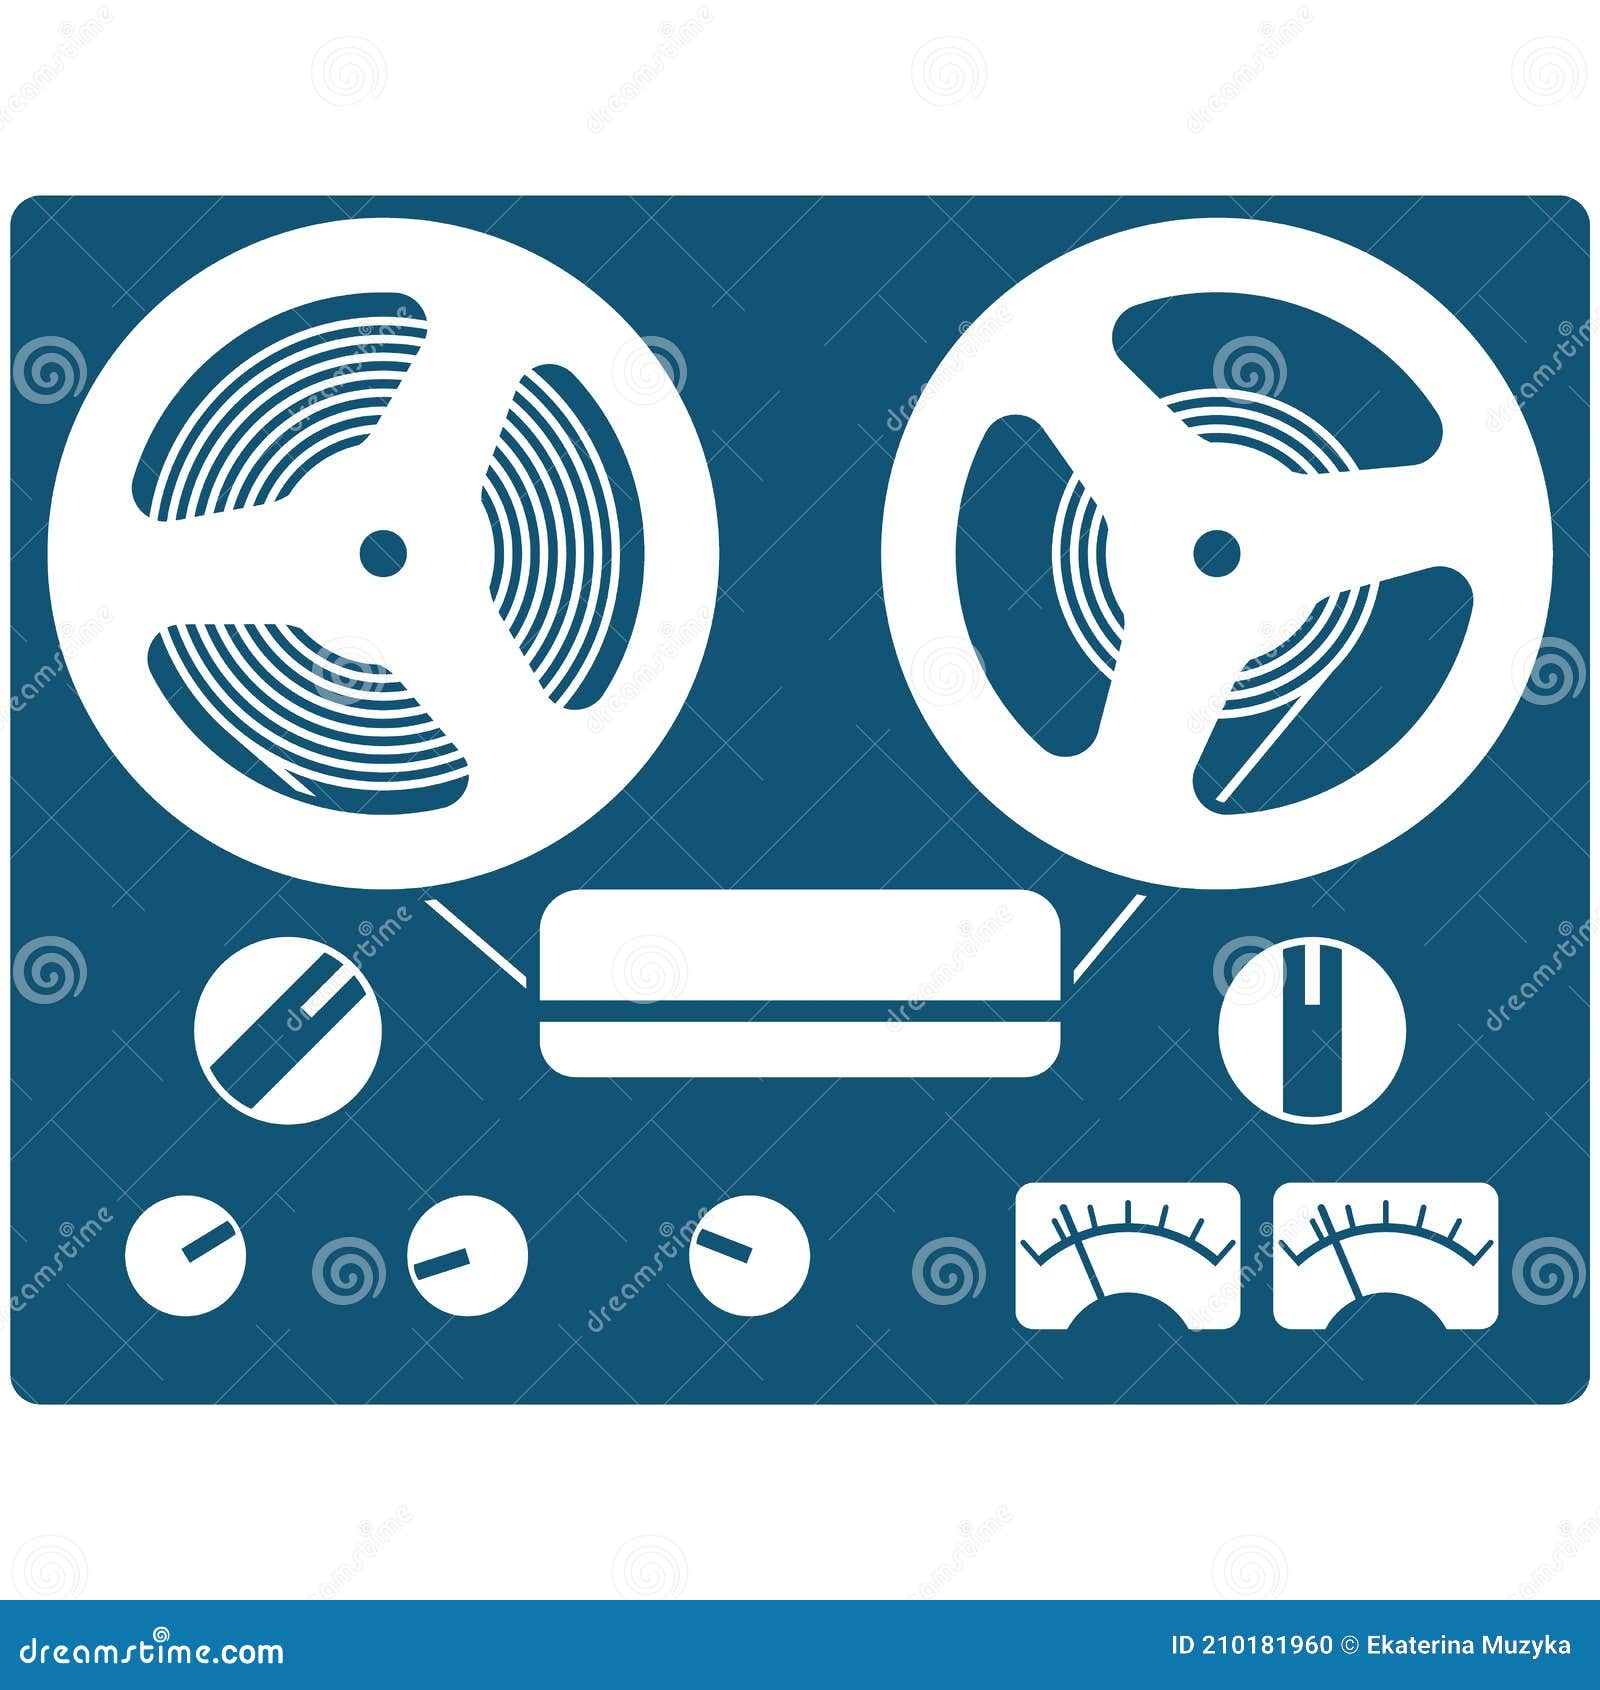 Reel To Reel Tape Recorder Stock Illustrations – 215 Reel To Reel Tape  Recorder Stock Illustrations, Vectors & Clipart - Dreamstime